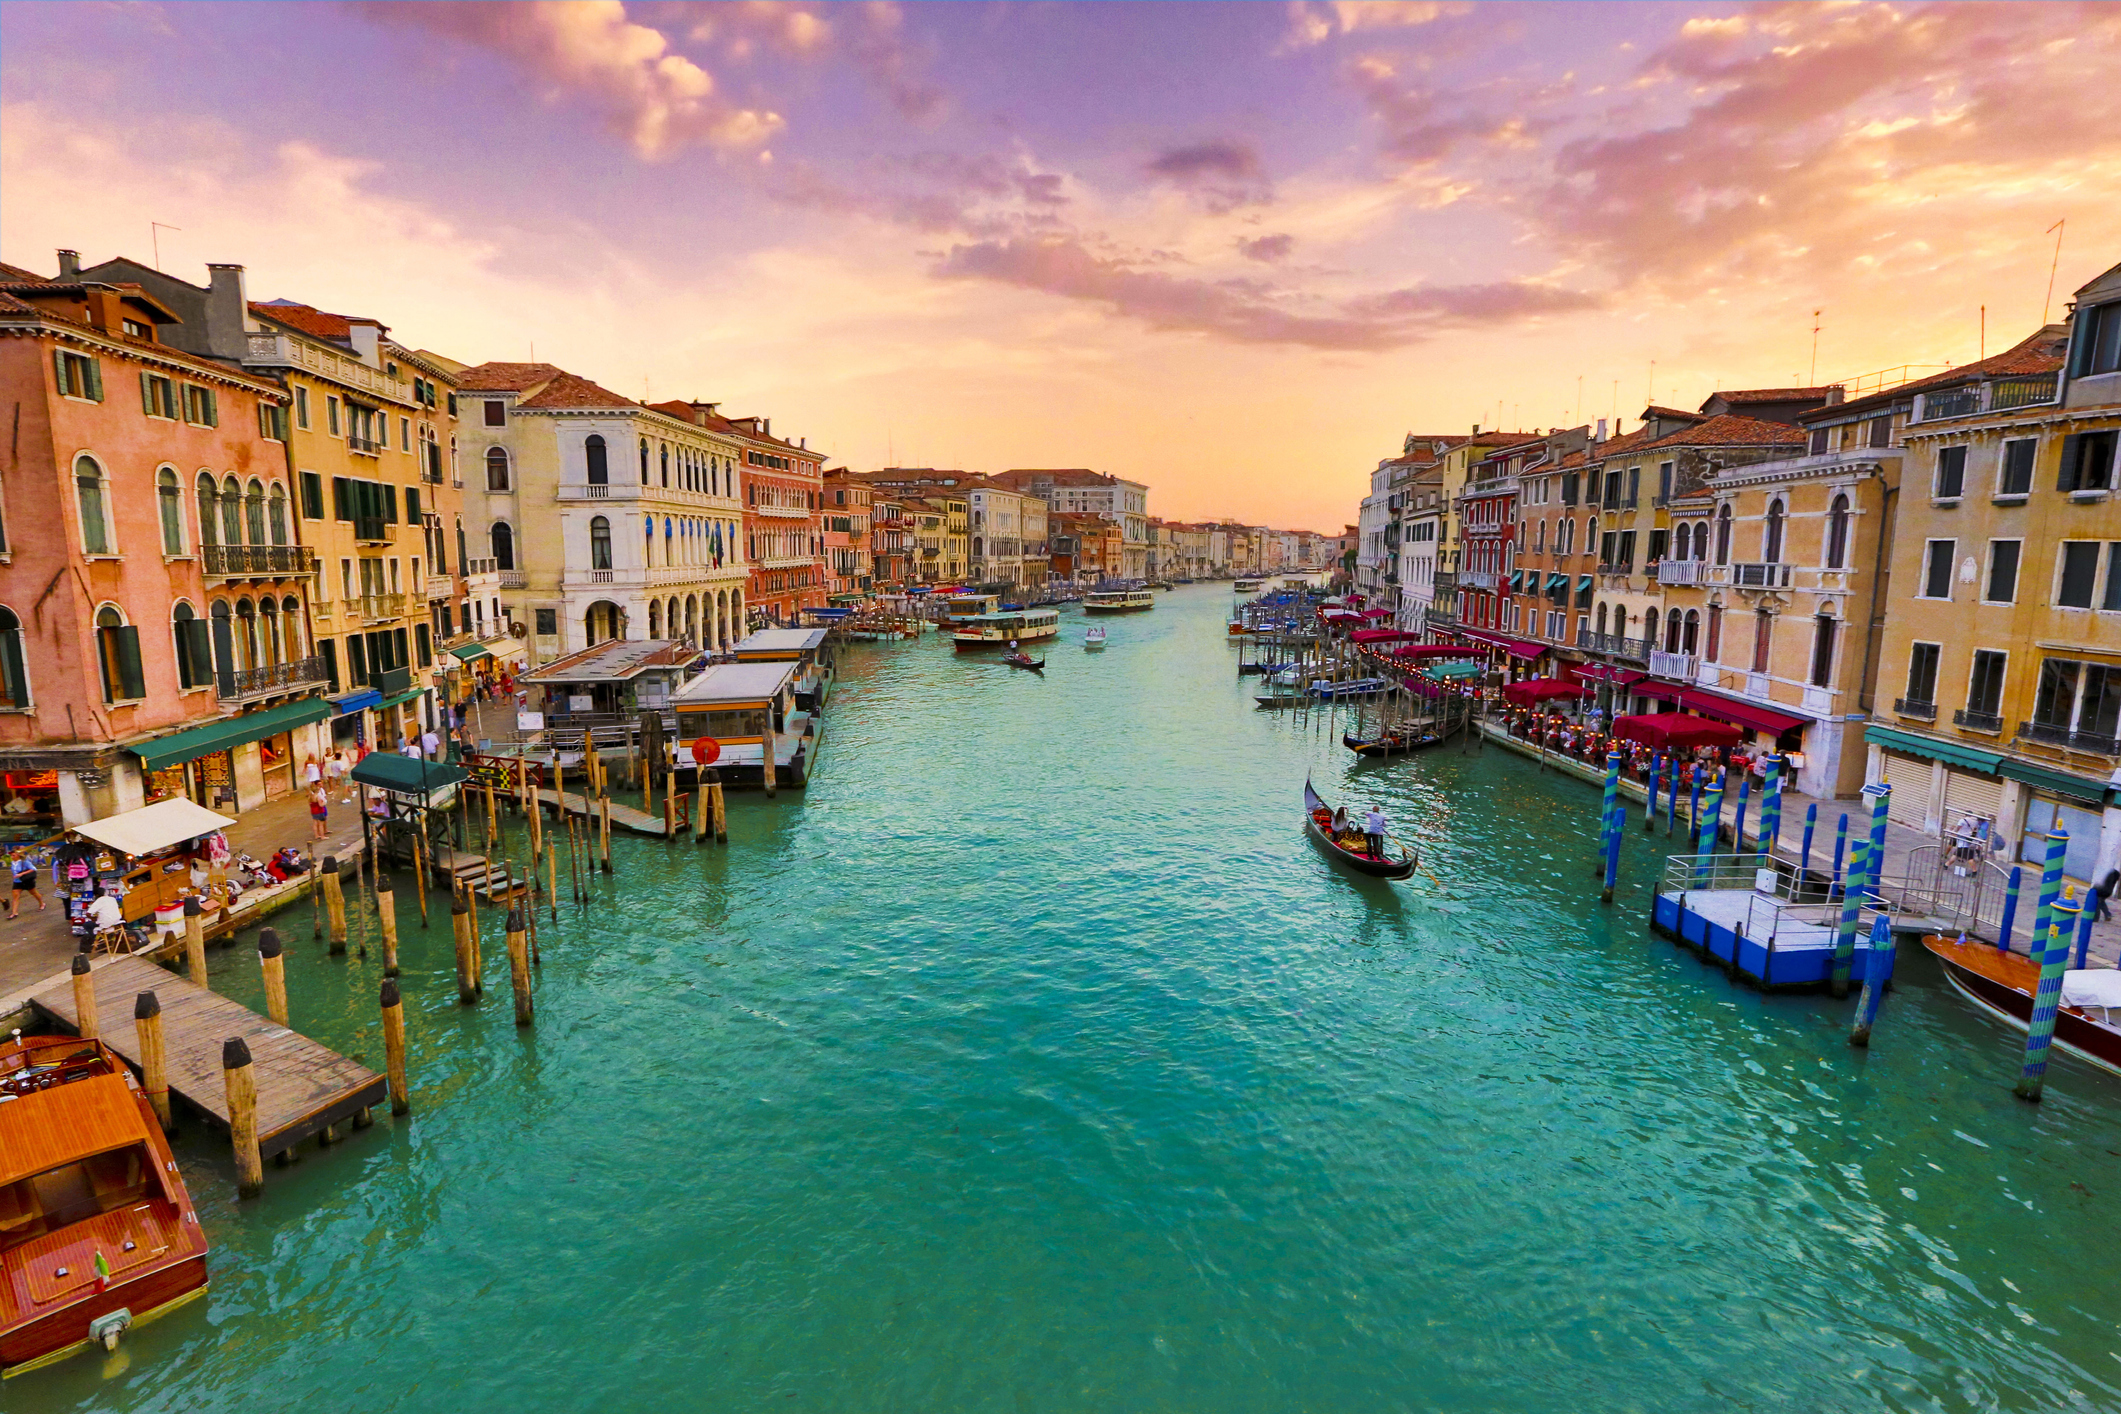 Study food culture in Italy, learn how to make traditional Italian dishes, take in the historic sites of Rome, and wander along the canals of Venice. Receive language and culinary training from renowned institutions. Summer study abroad in Italy